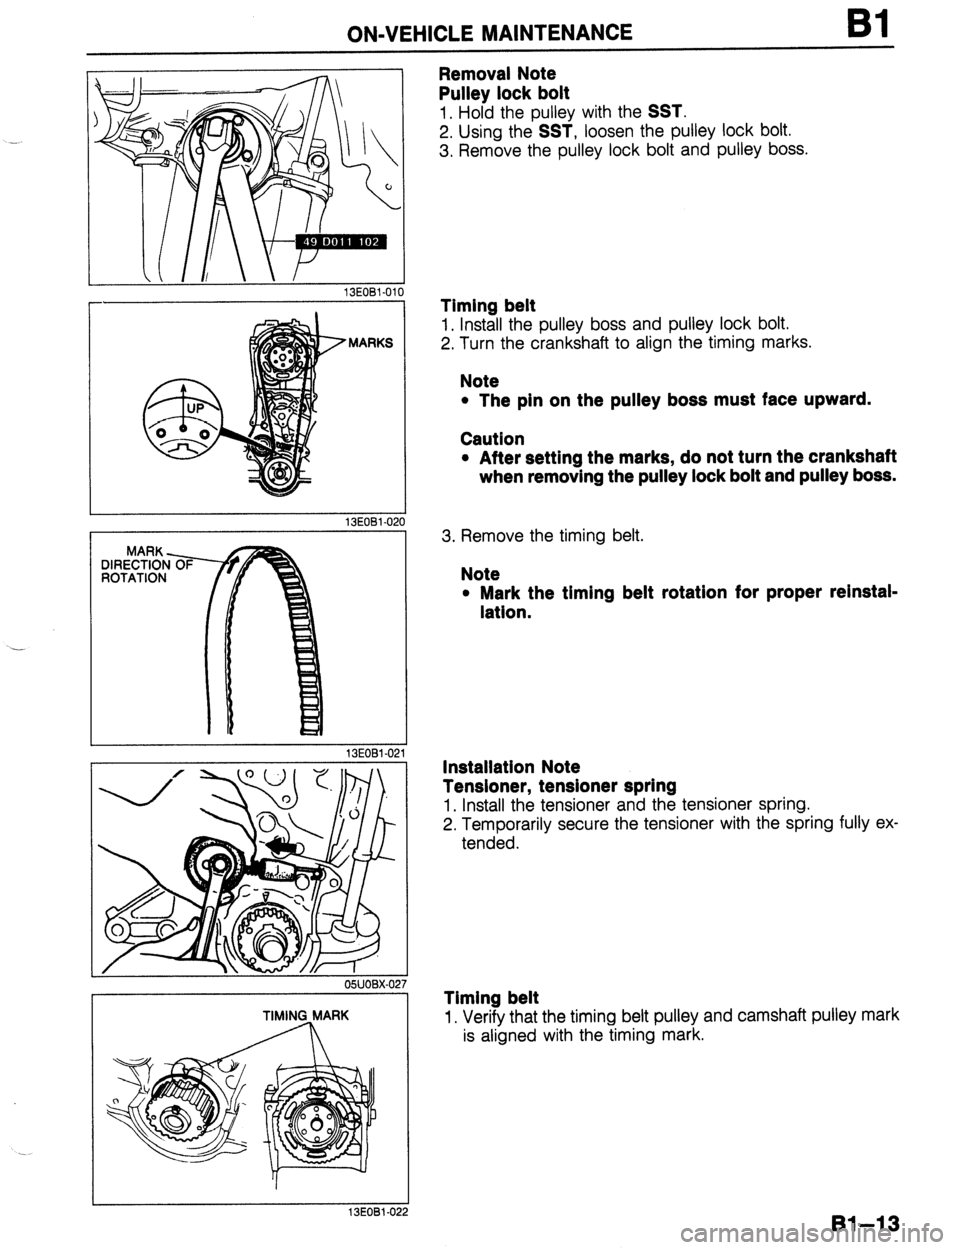 MAZDA PROTEGE 1992 Service Manual - 
. . . 
ON-VEHICLE MAINTENANCE Bl 
13EOBl-010 
Removal Note 
Pulley lock bolt 
1. Hold the pulley with the SST. 
2. Using the SST, loosen the pulley lock bolt. 
3. Remove the pulley lock bolt and pu